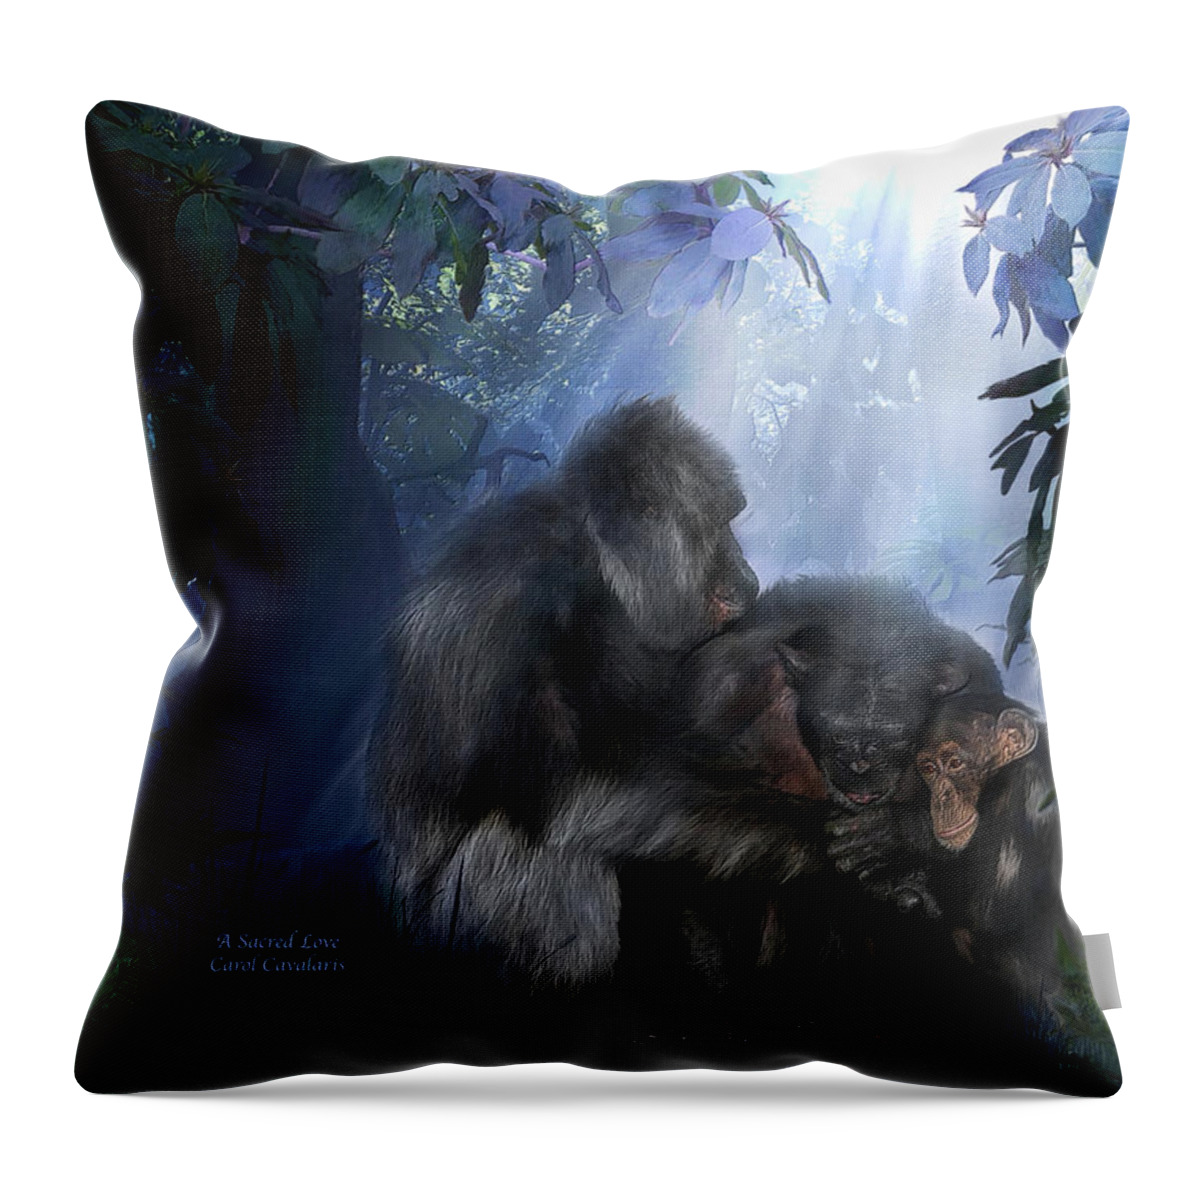 Gorilla Throw Pillow featuring the mixed media A Sacred Love by Carol Cavalaris